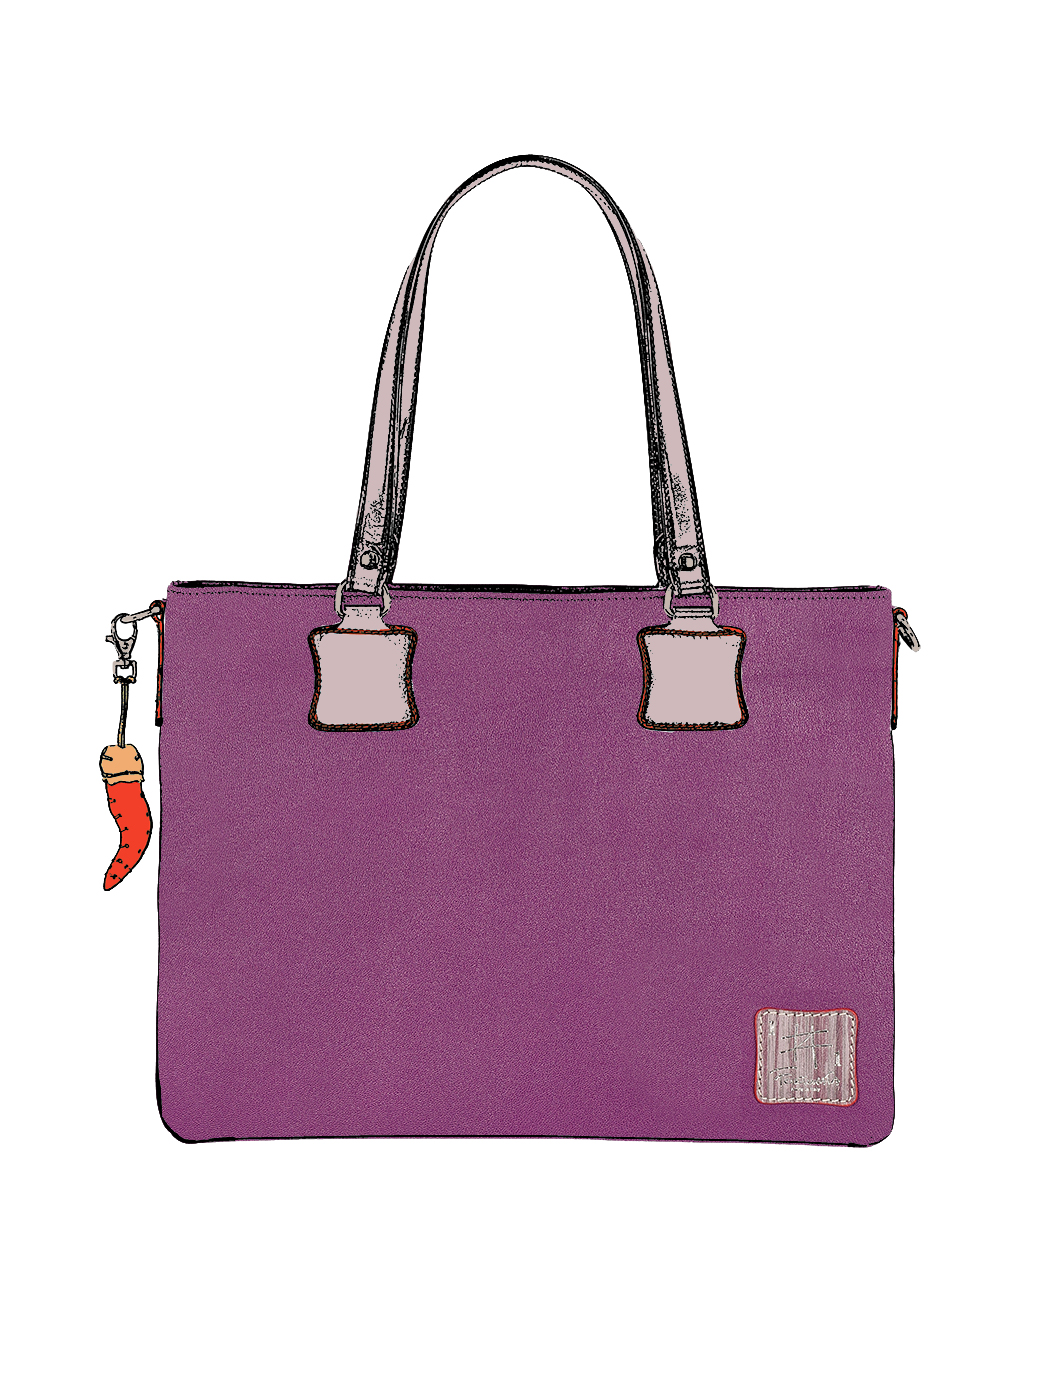 Shoulder Tote Bag Leather Purple - Handmade in Italy